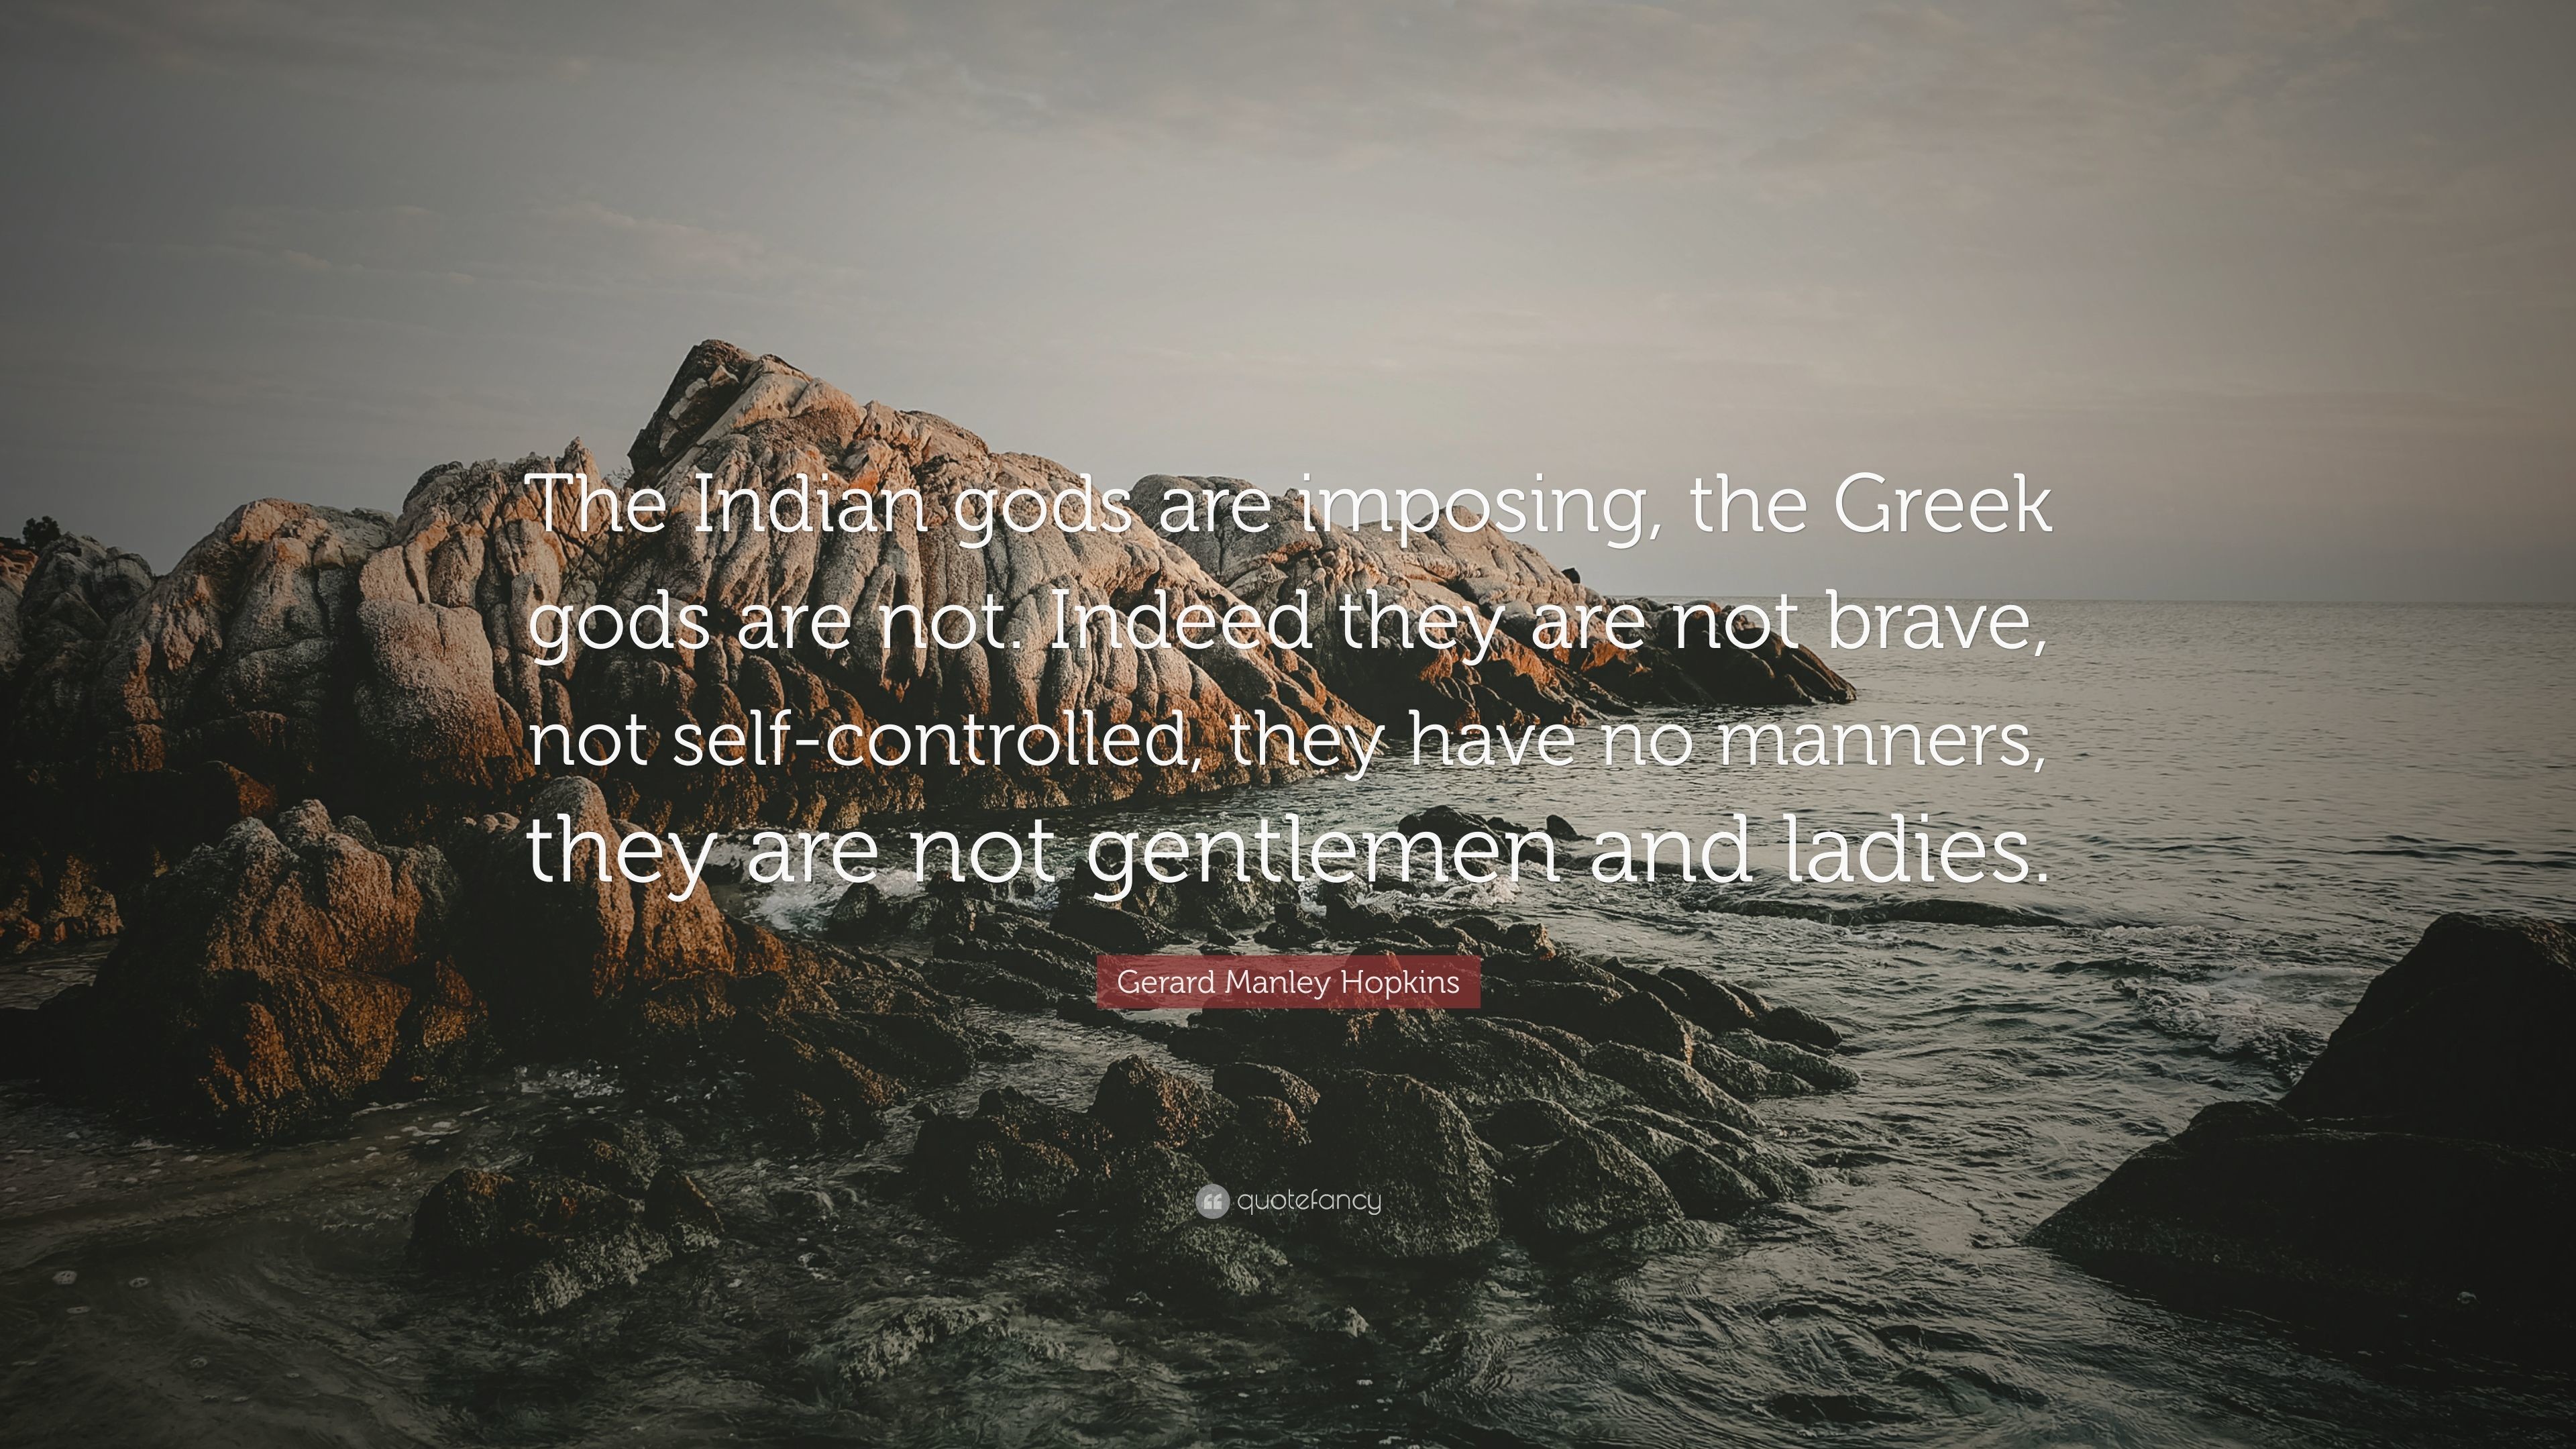 3840x2160 Gerard Manley Hopkins Quote: “The Indian gods are imposing, the Greek gods  are